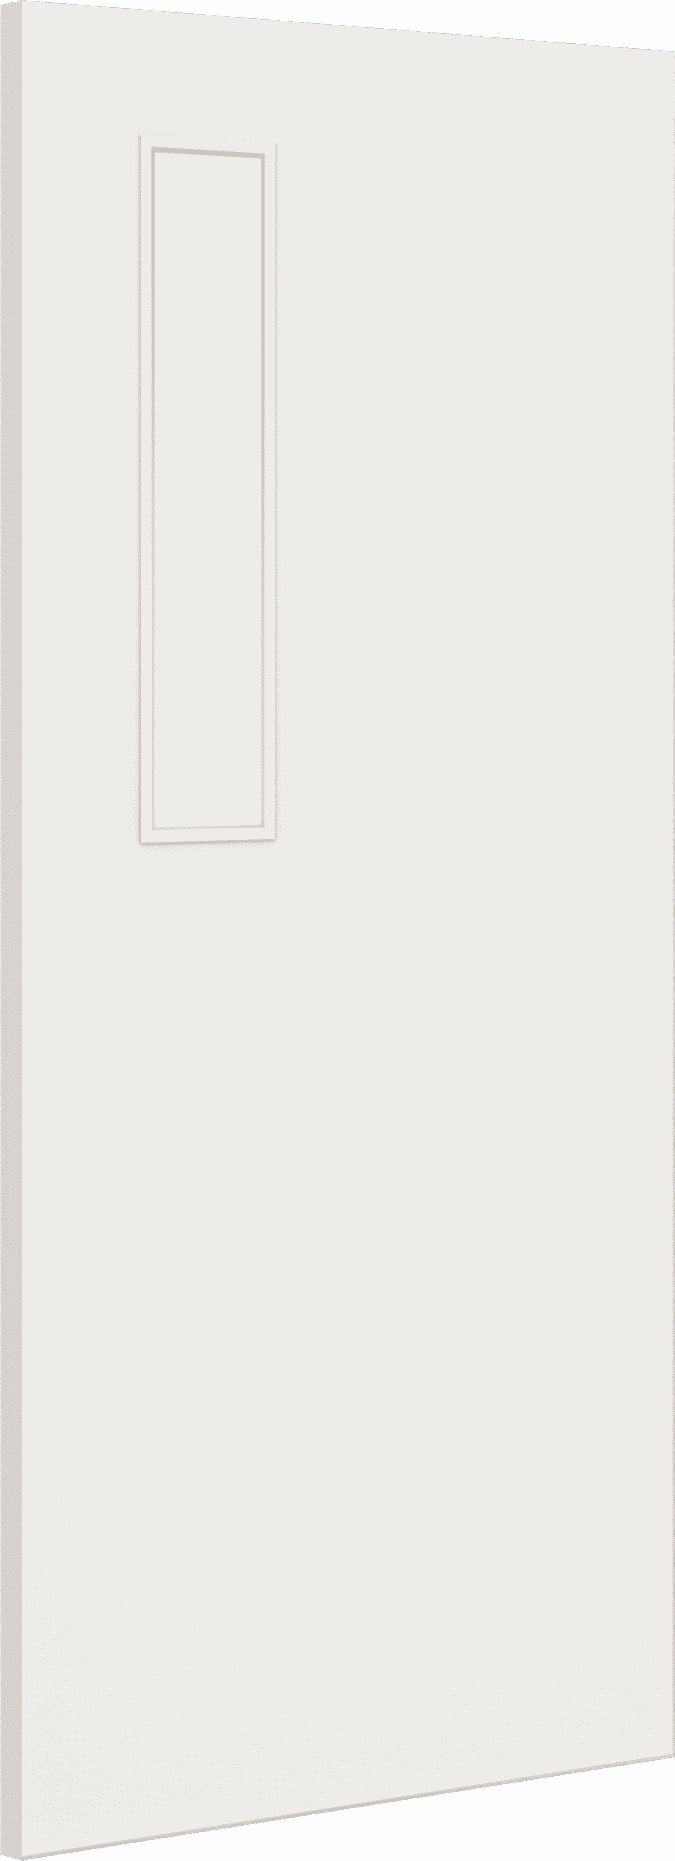 2040mm x 926mm x 44mm Architectural Paint Grade White 08 Frosted Glazed Fire Door Blank